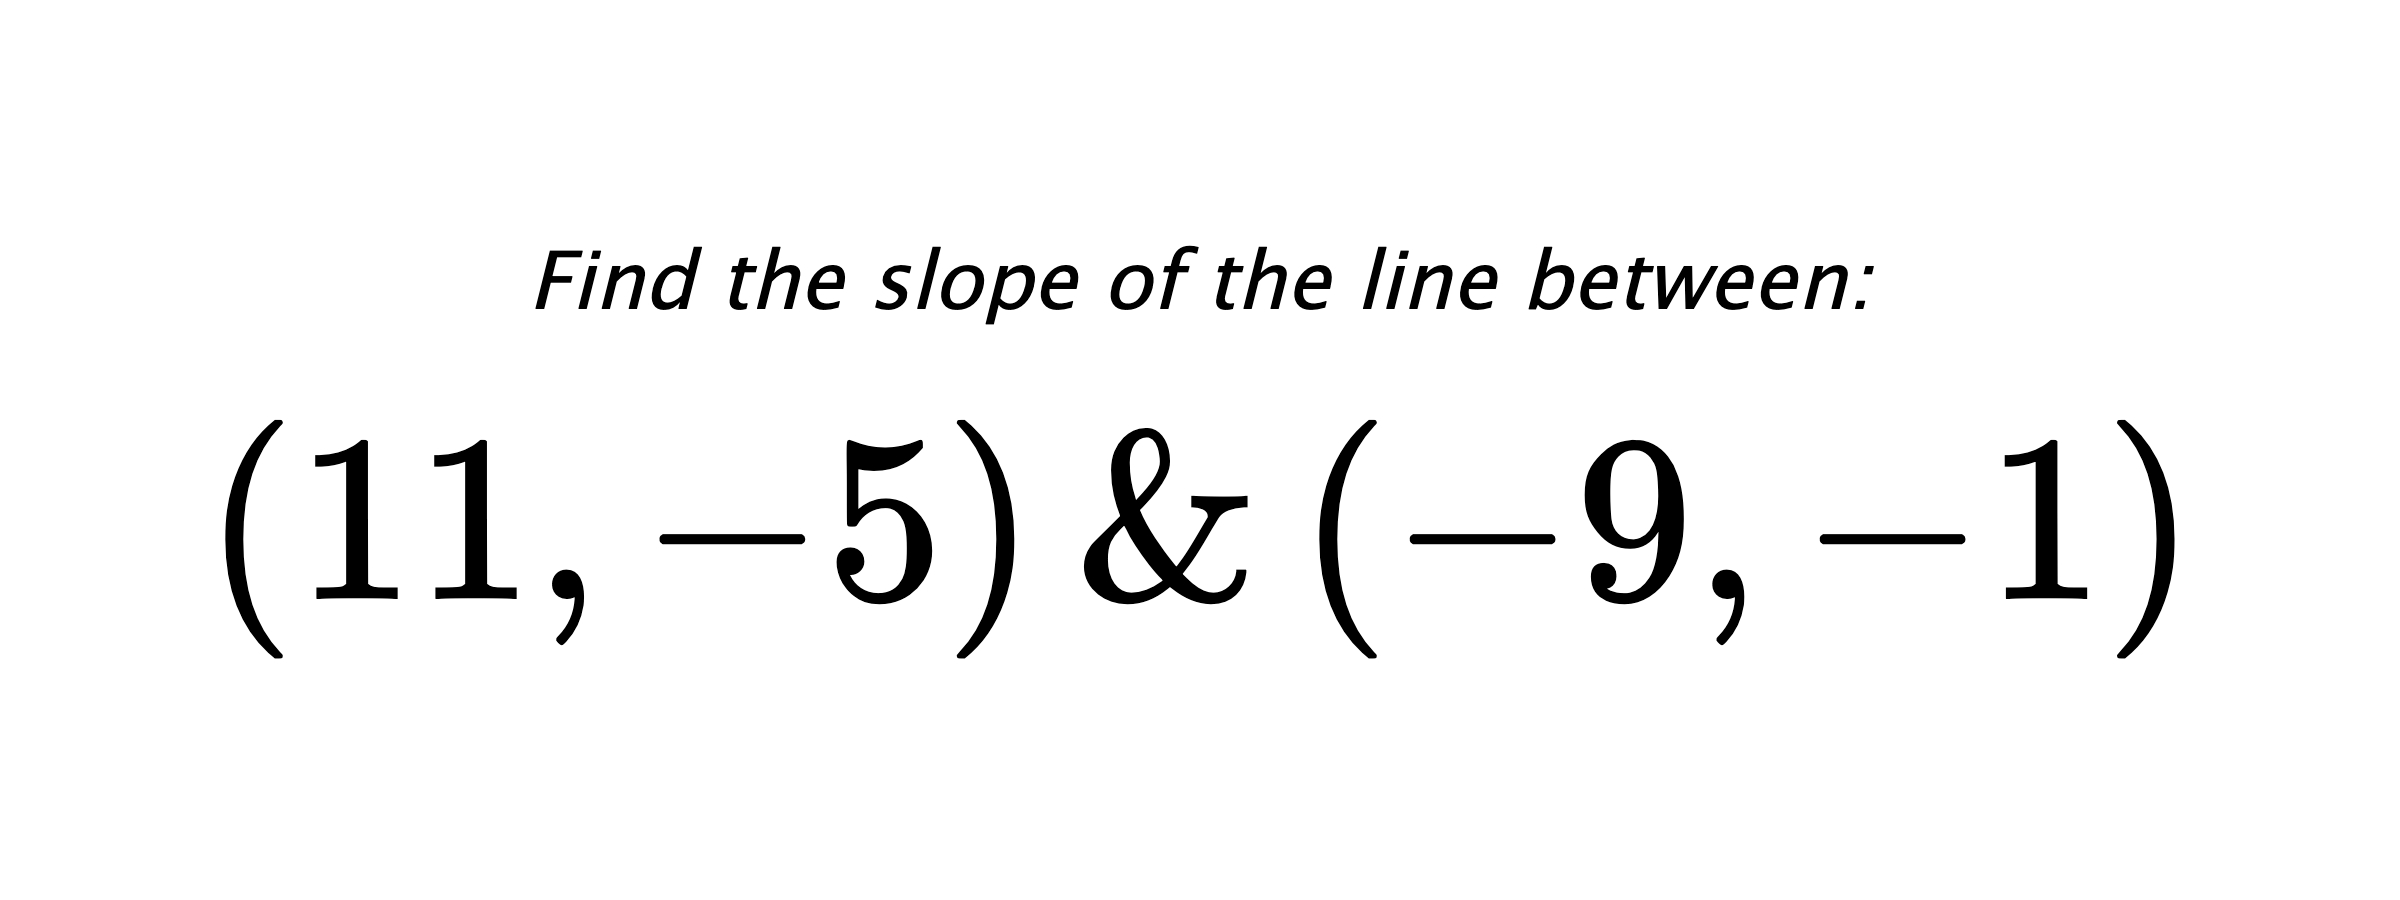 Find the slope of the line between: $ (11,-5) \hspace{0.5cm} \text{&} \hspace{0.5cm} (-9,-1) $